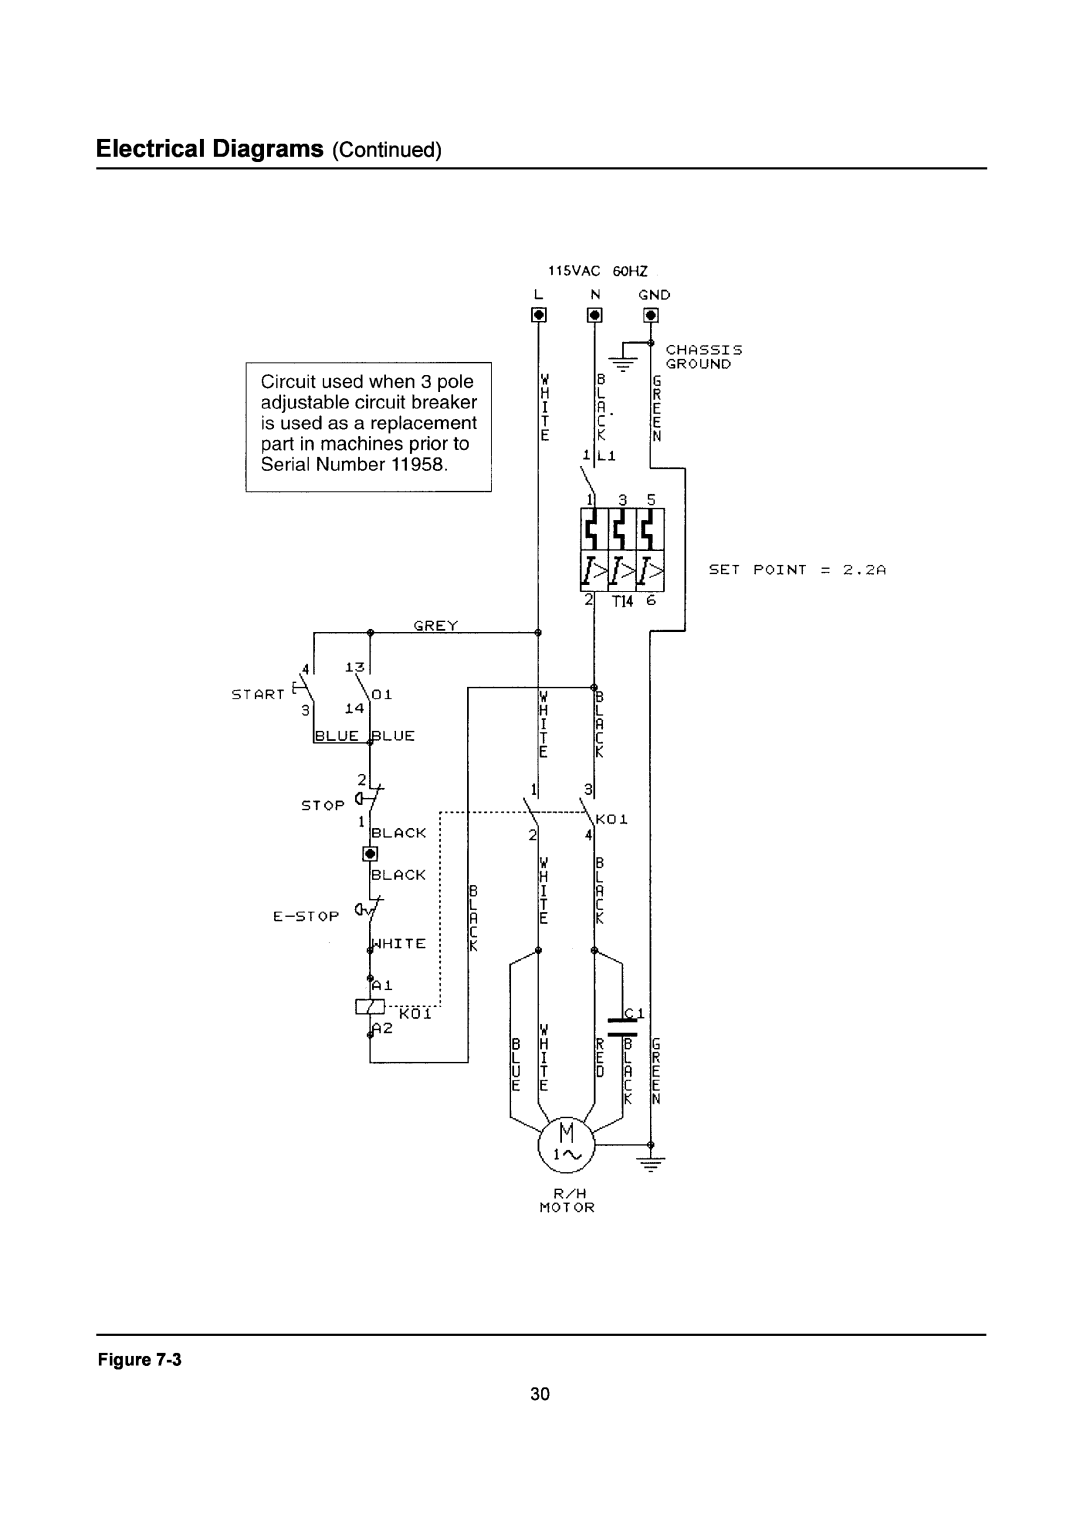 3M 200a manual Electrical Diagrams Continued 